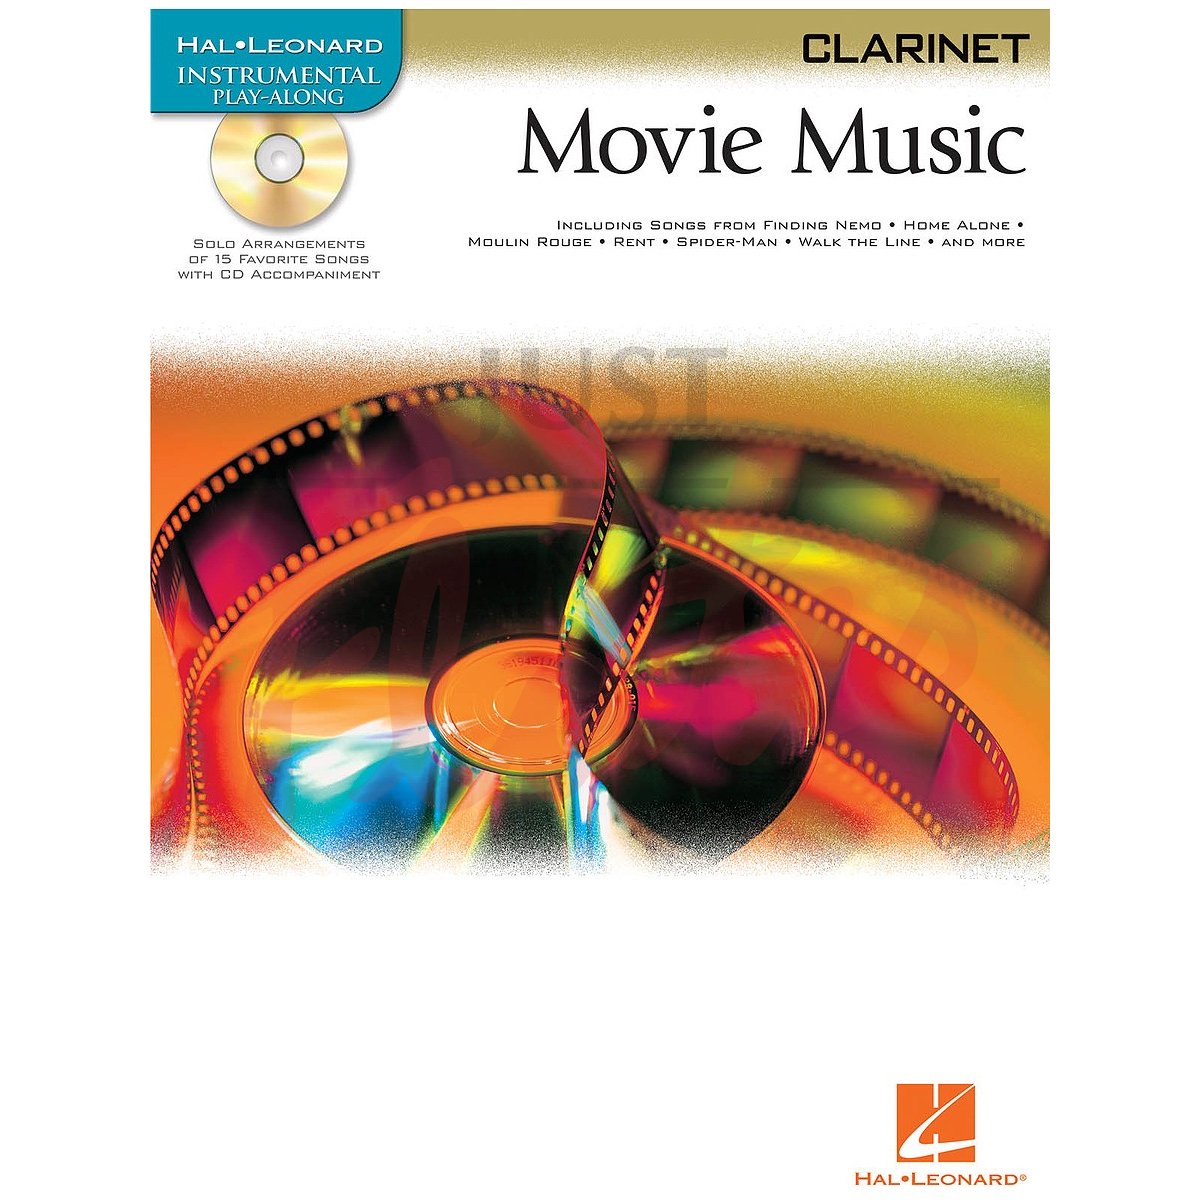 Movie Music Play-Along for Clarinet